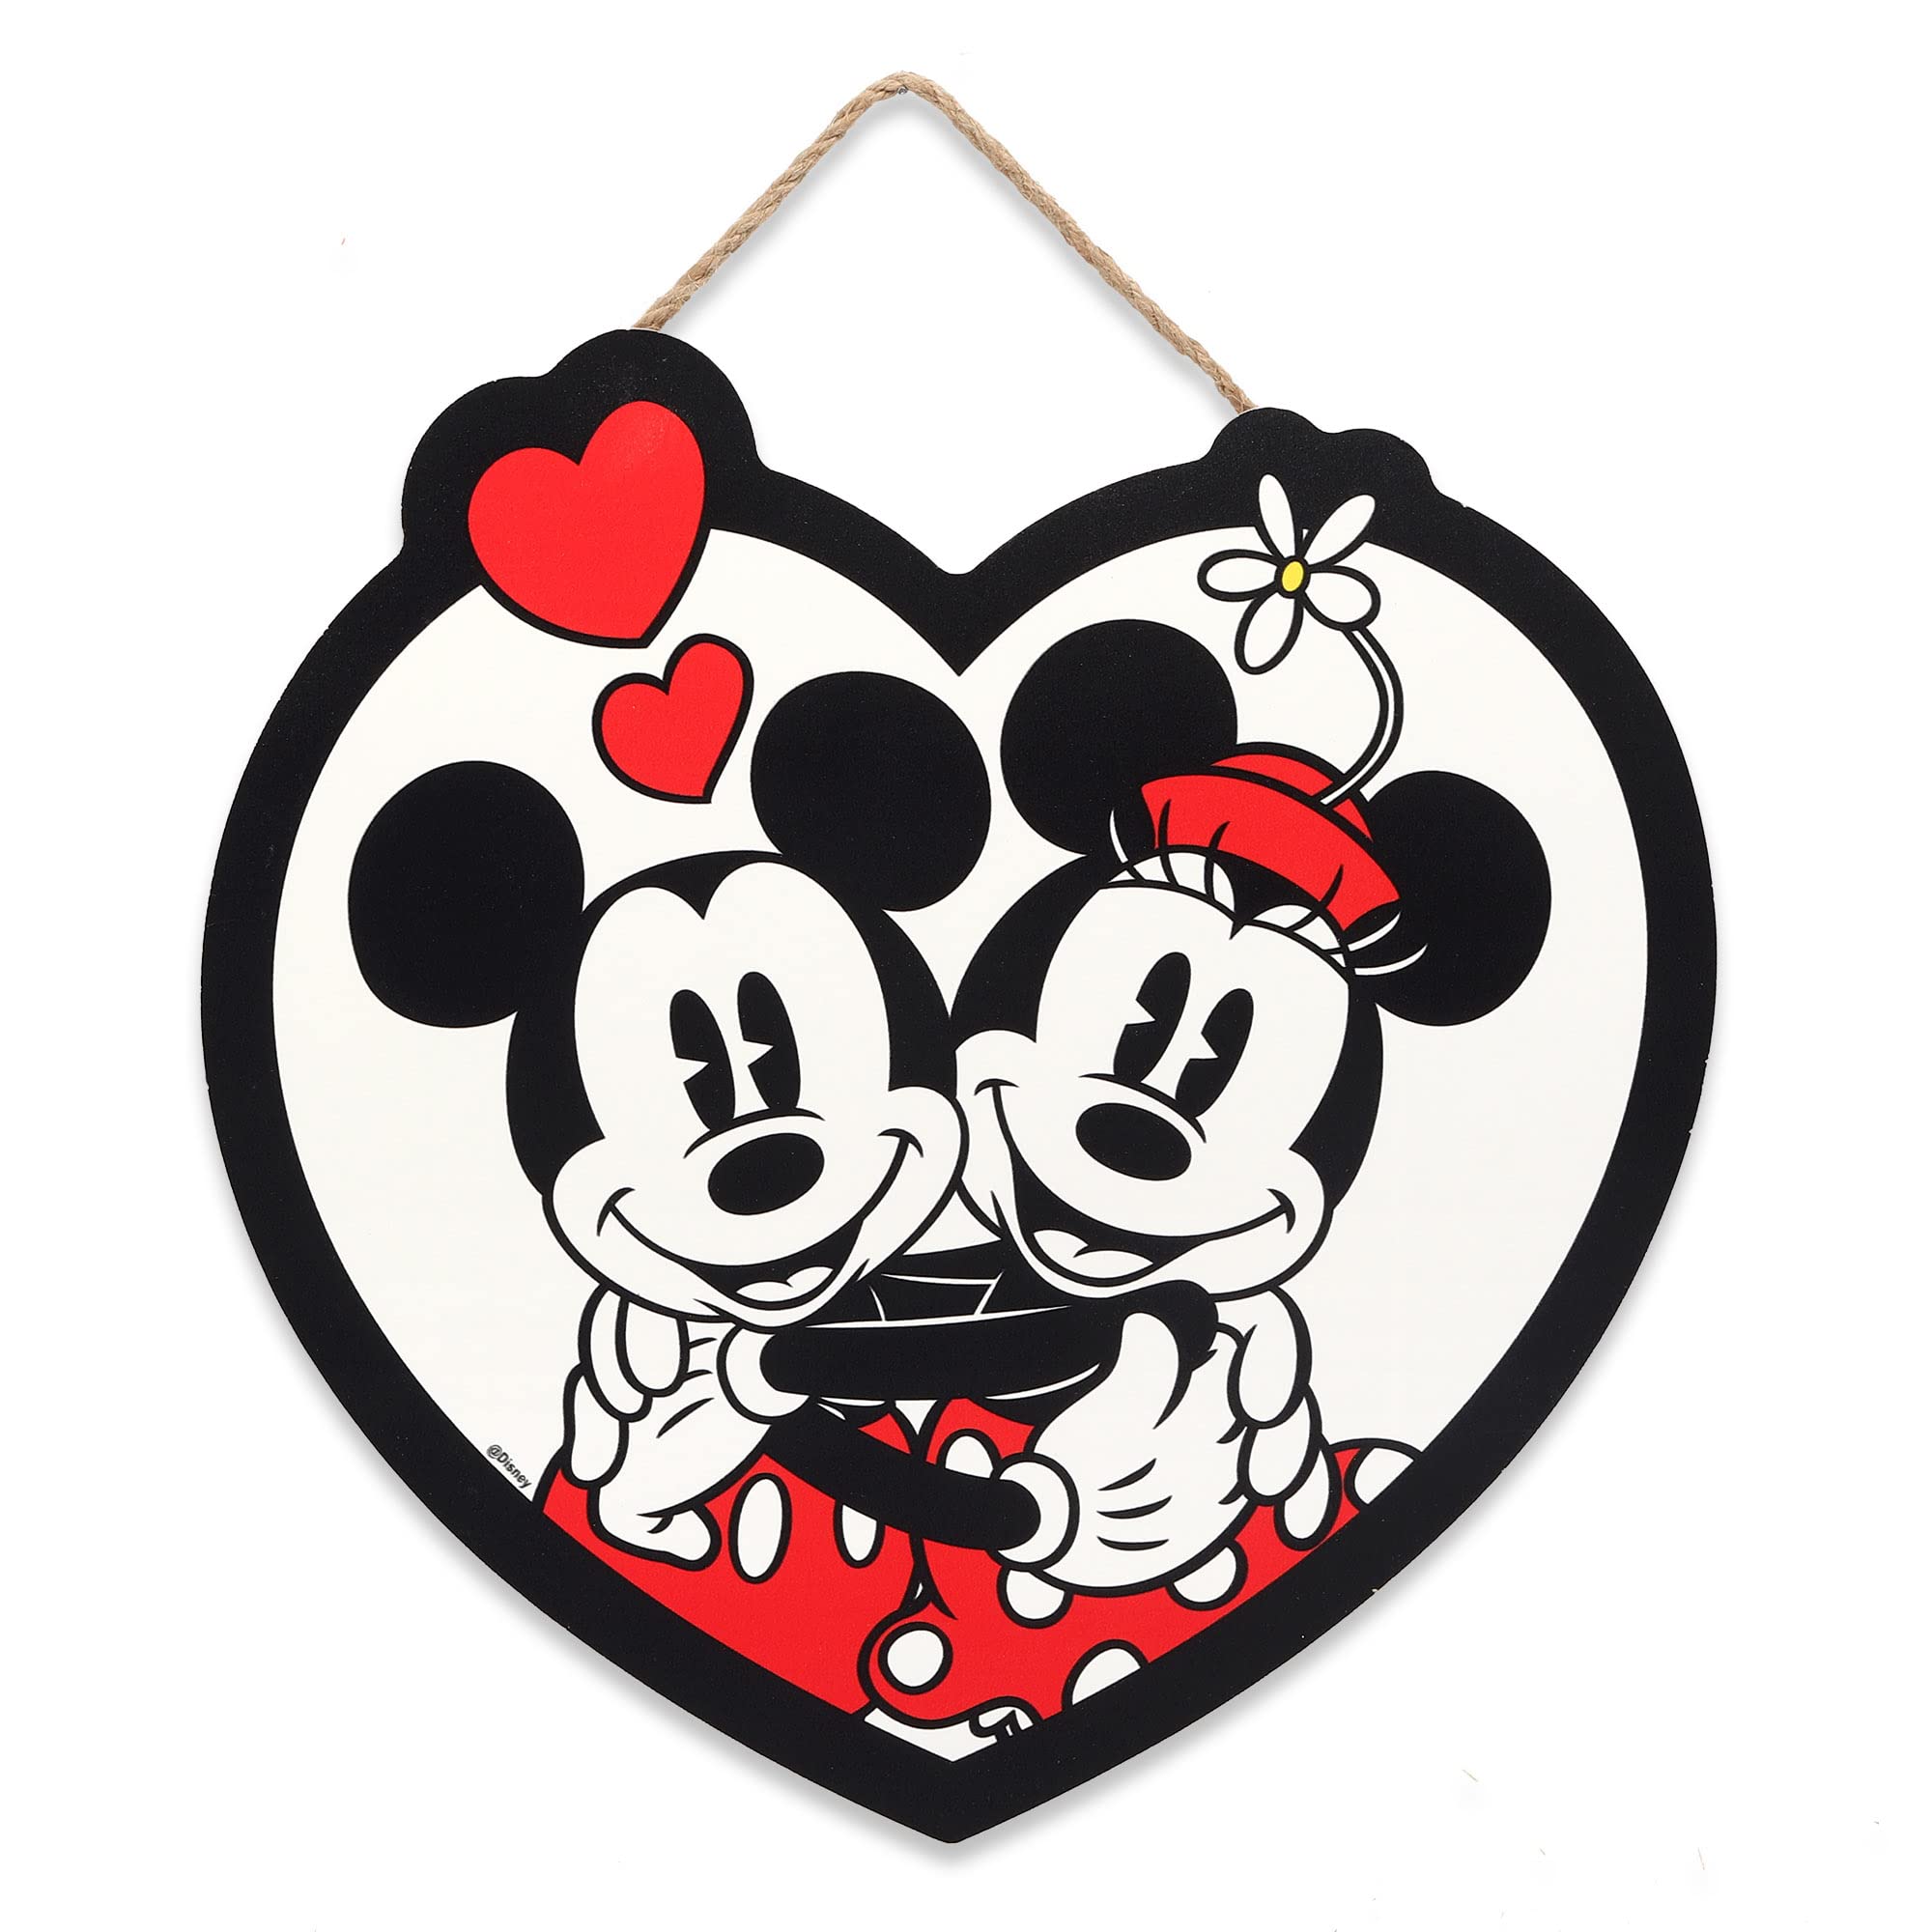 Open Road Brands Disney Mickey Mouse and Minnie Mouse Hanging Wood Sign - Heart Shaped Mickey Mouse Wall Art